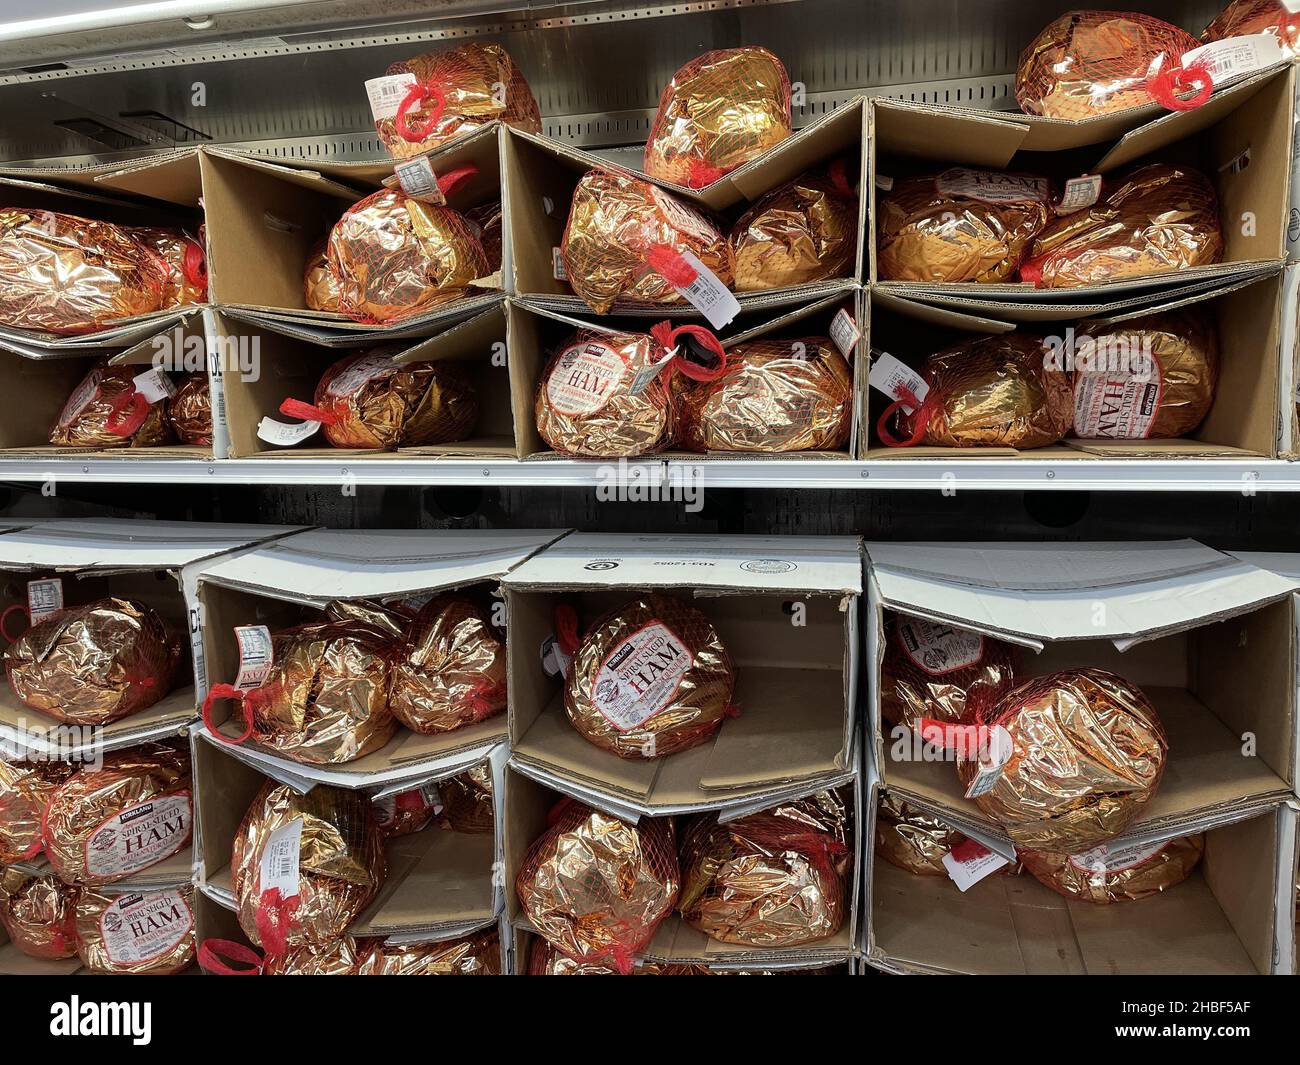 FRESNO, UNITED STATES - Nov 16, 2021: A closeup of Costco Ham in gold colored wrapping on shelves for the Holidays Stock Photo